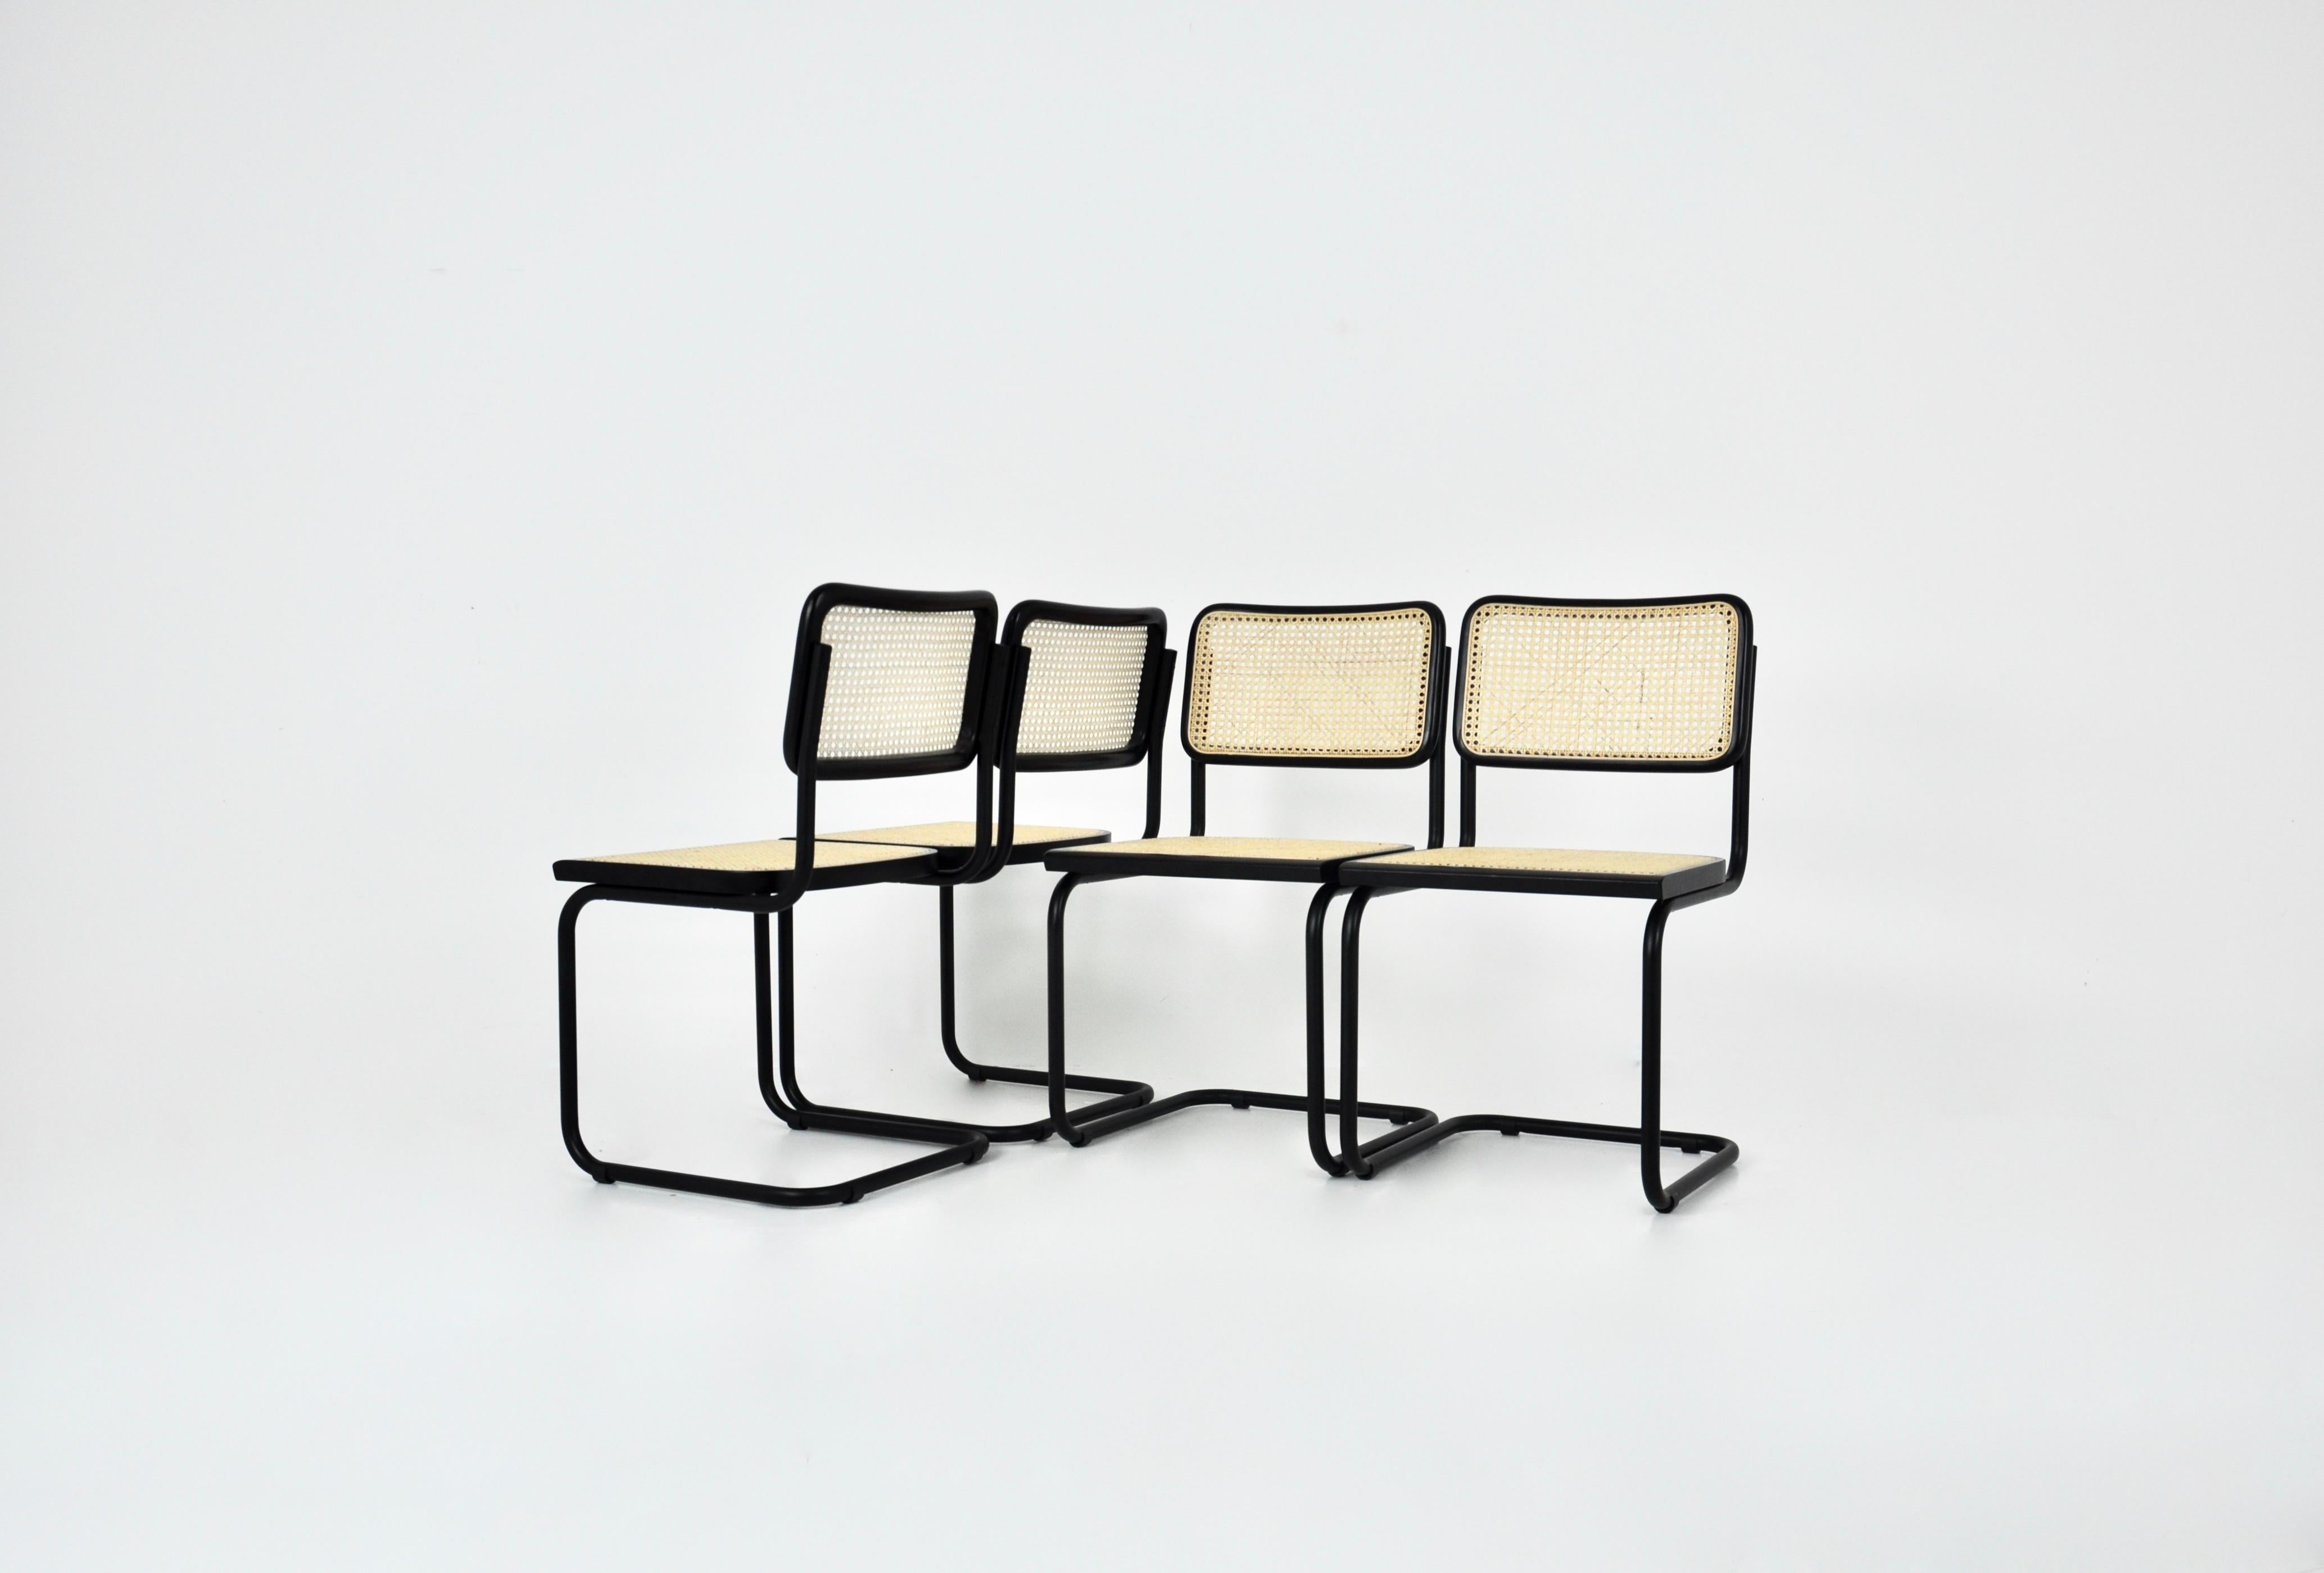 Set of 4 black chairs in metal, wood and rattan. Dimensions: seat height: 46 cm. Wear due to time and age of the chairs.